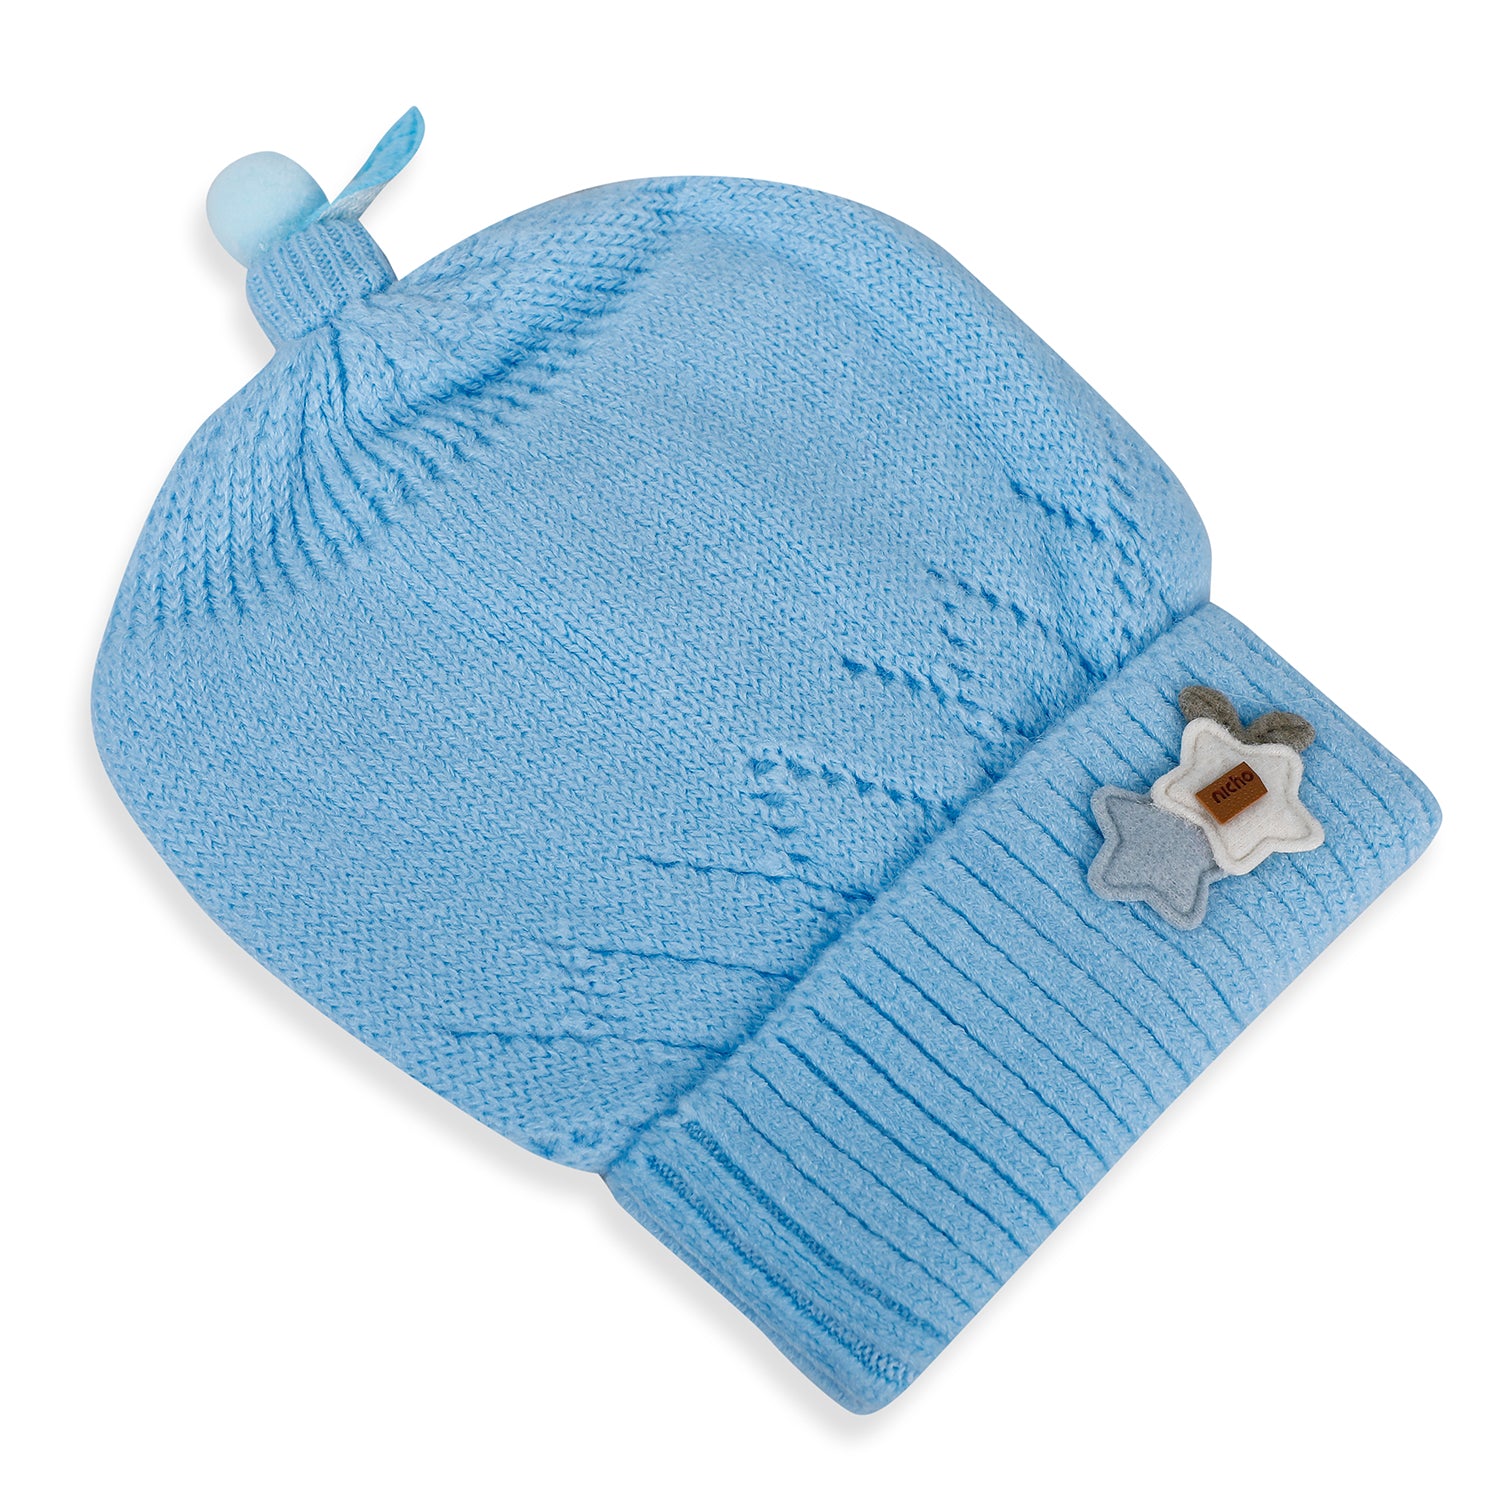 Baby Moo Star Breathable Beanie Warm Knitted Woollen Cap - Blue